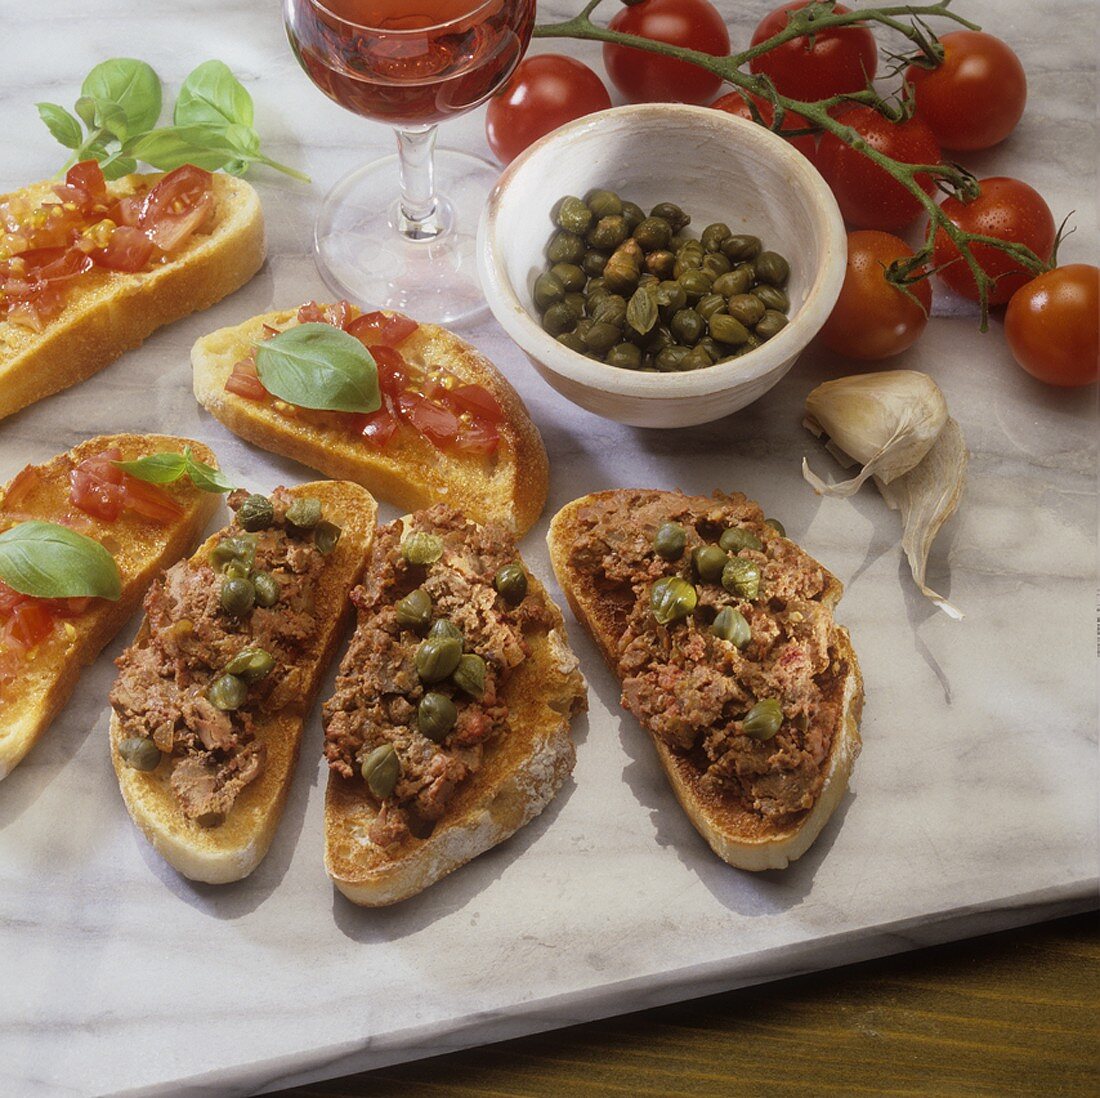 Bruschetta and crostini with paté and capers